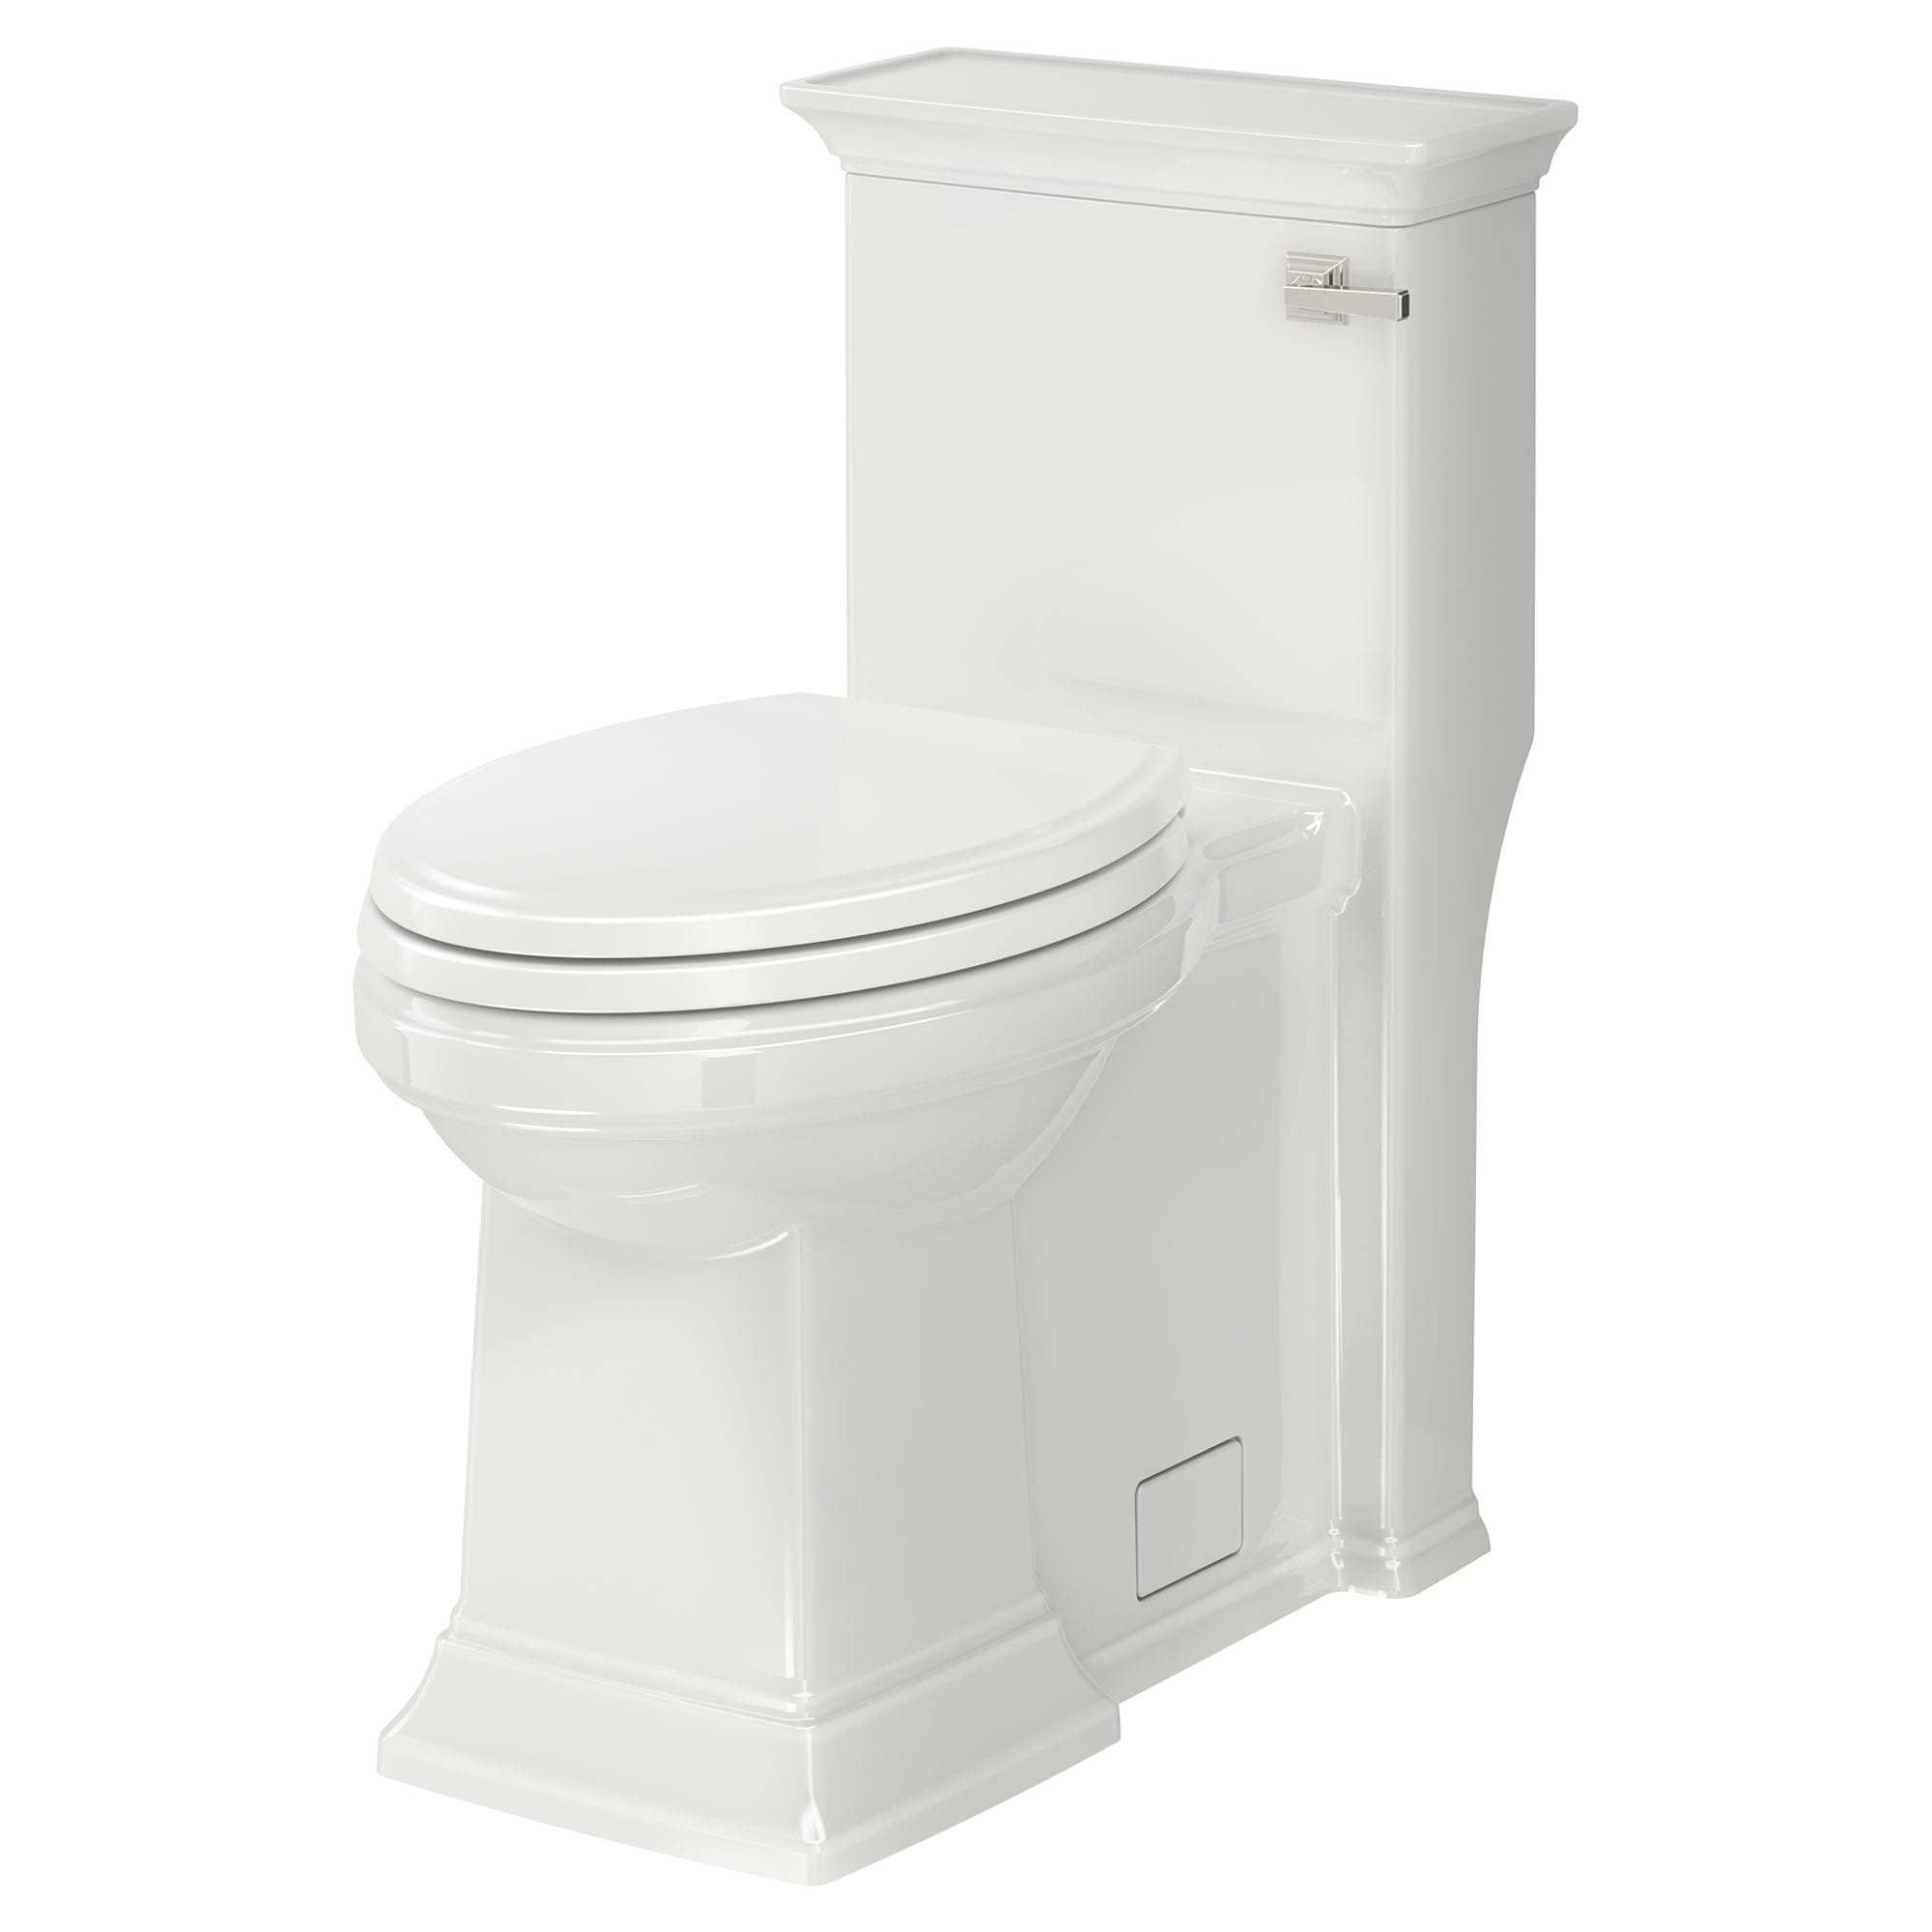 Town Square S One Piece 128 gpf 48 Lpf Chair Height Right Hand Trip Lever Elongated Toilet With Seat WHITE